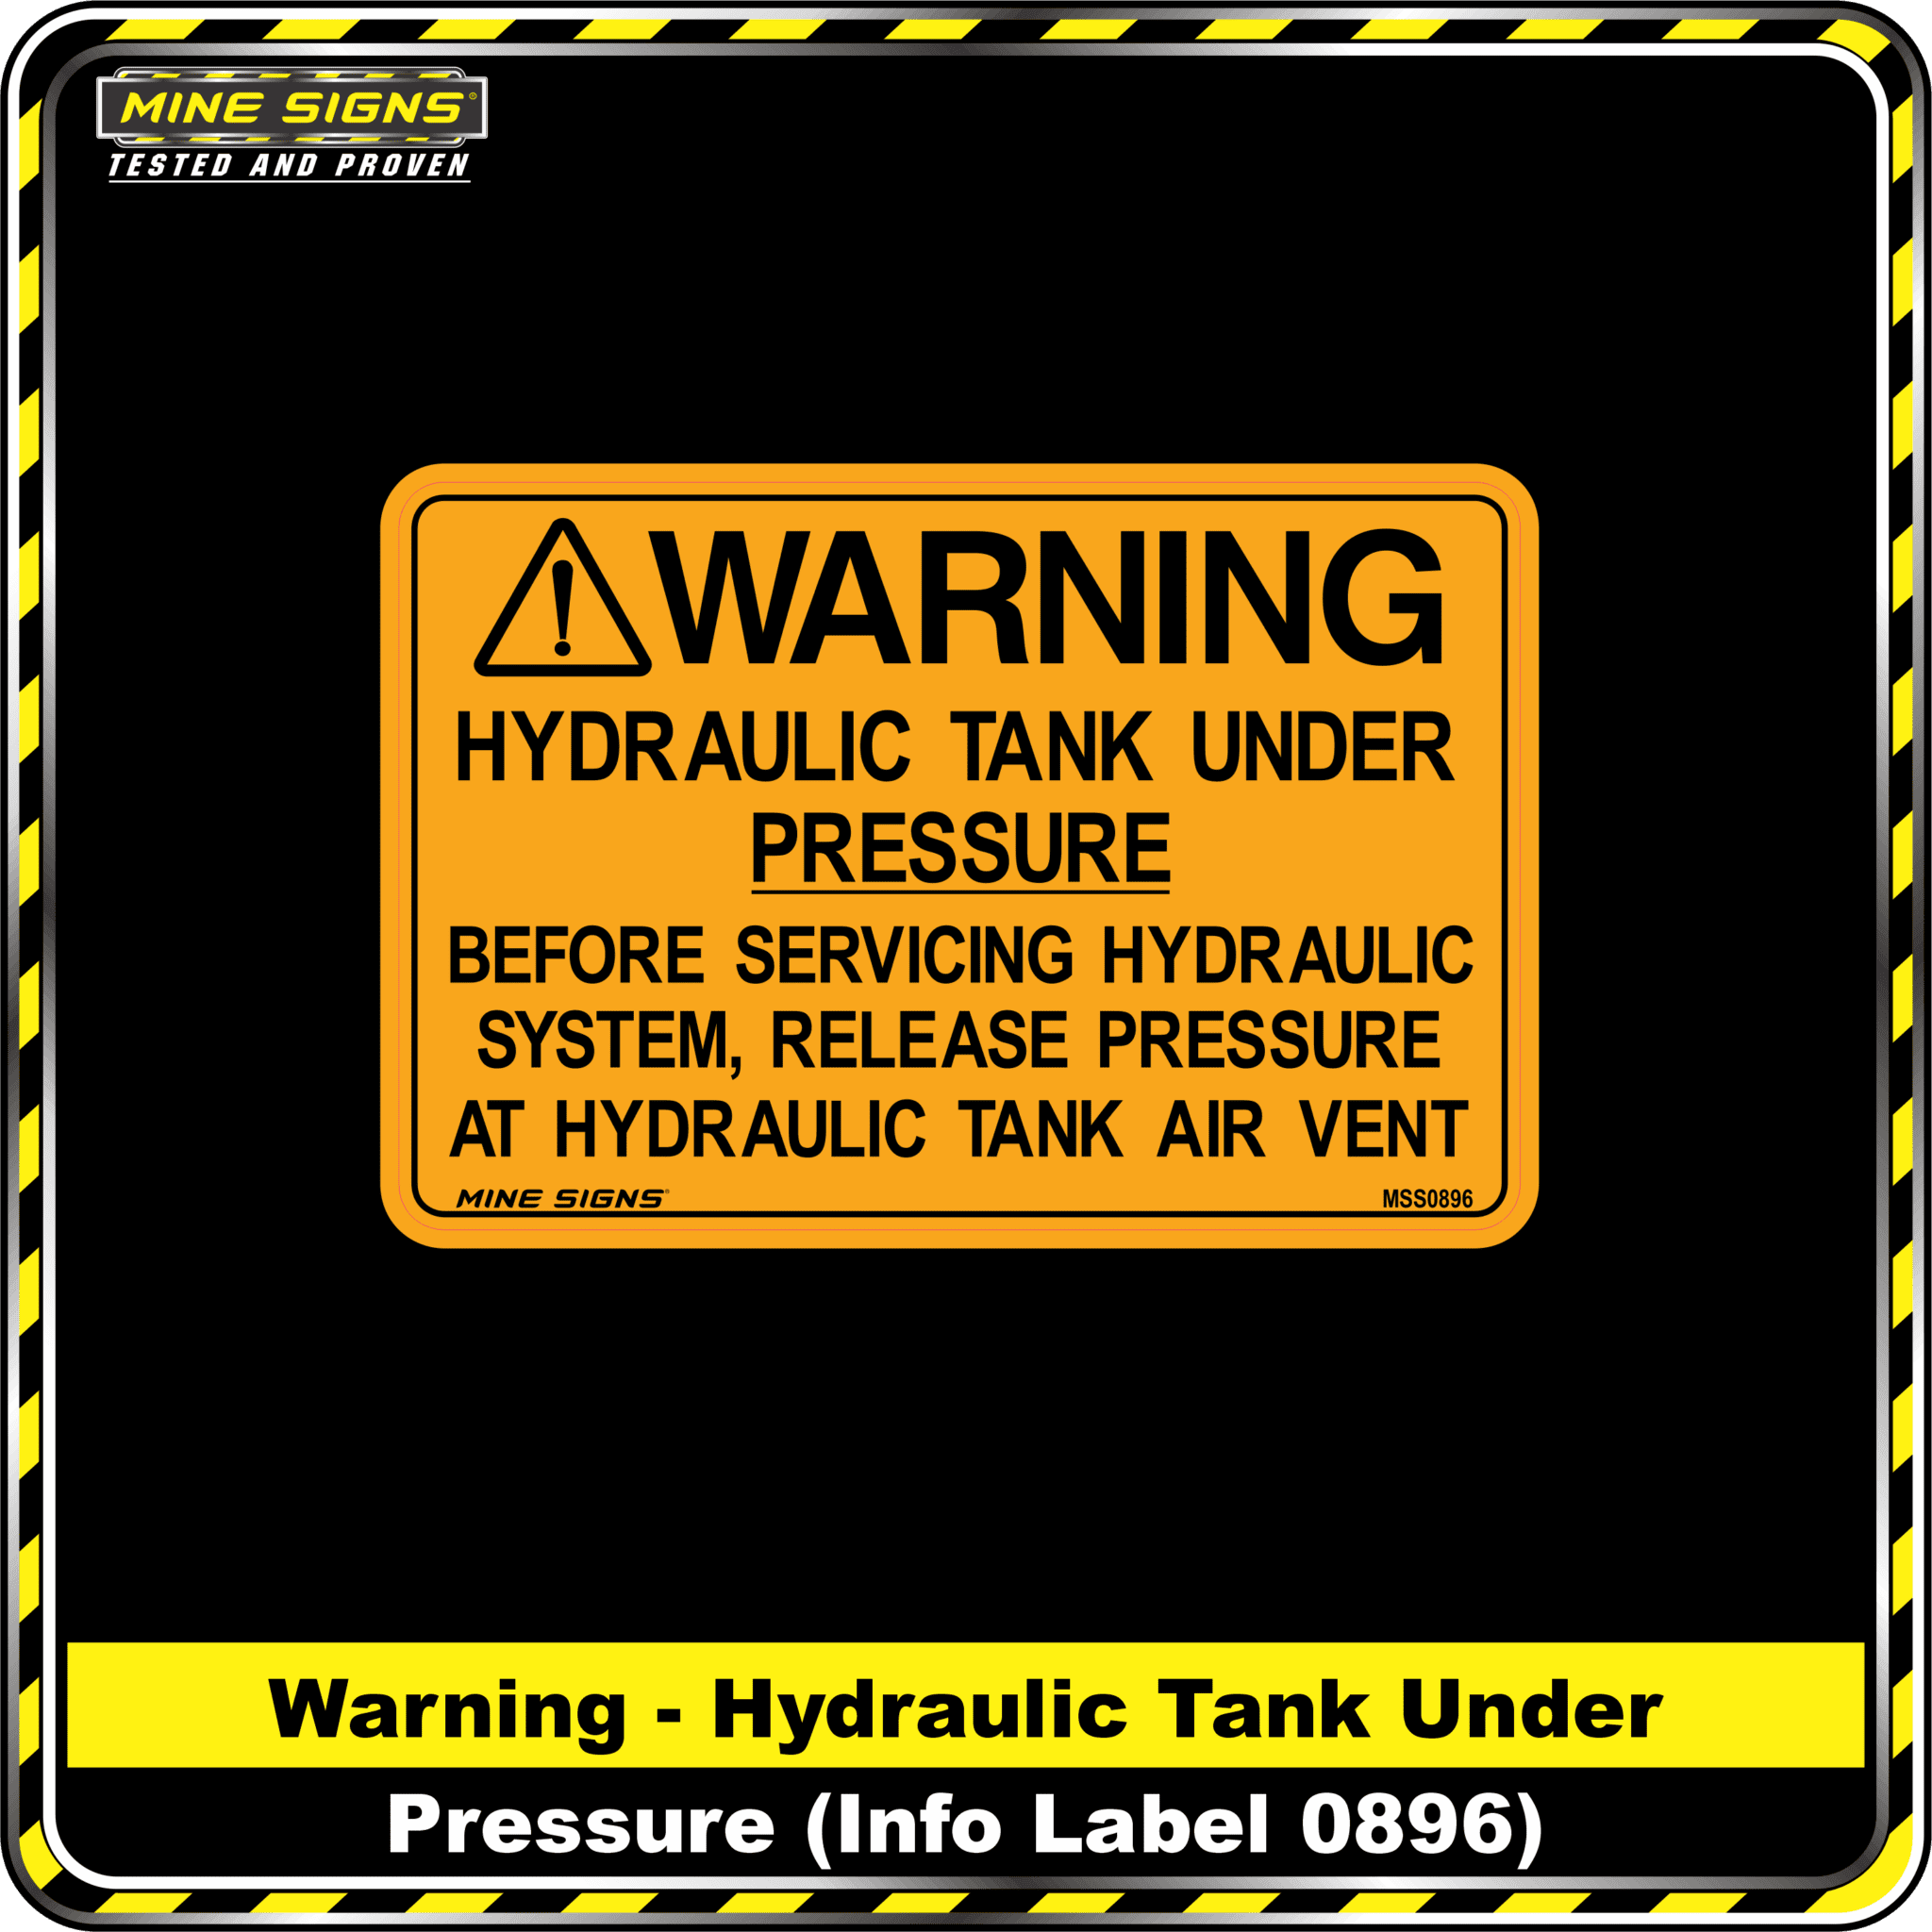 MS - Product Background - Safety Signs - Warning Hydraulic Tank Under Pressure 0896